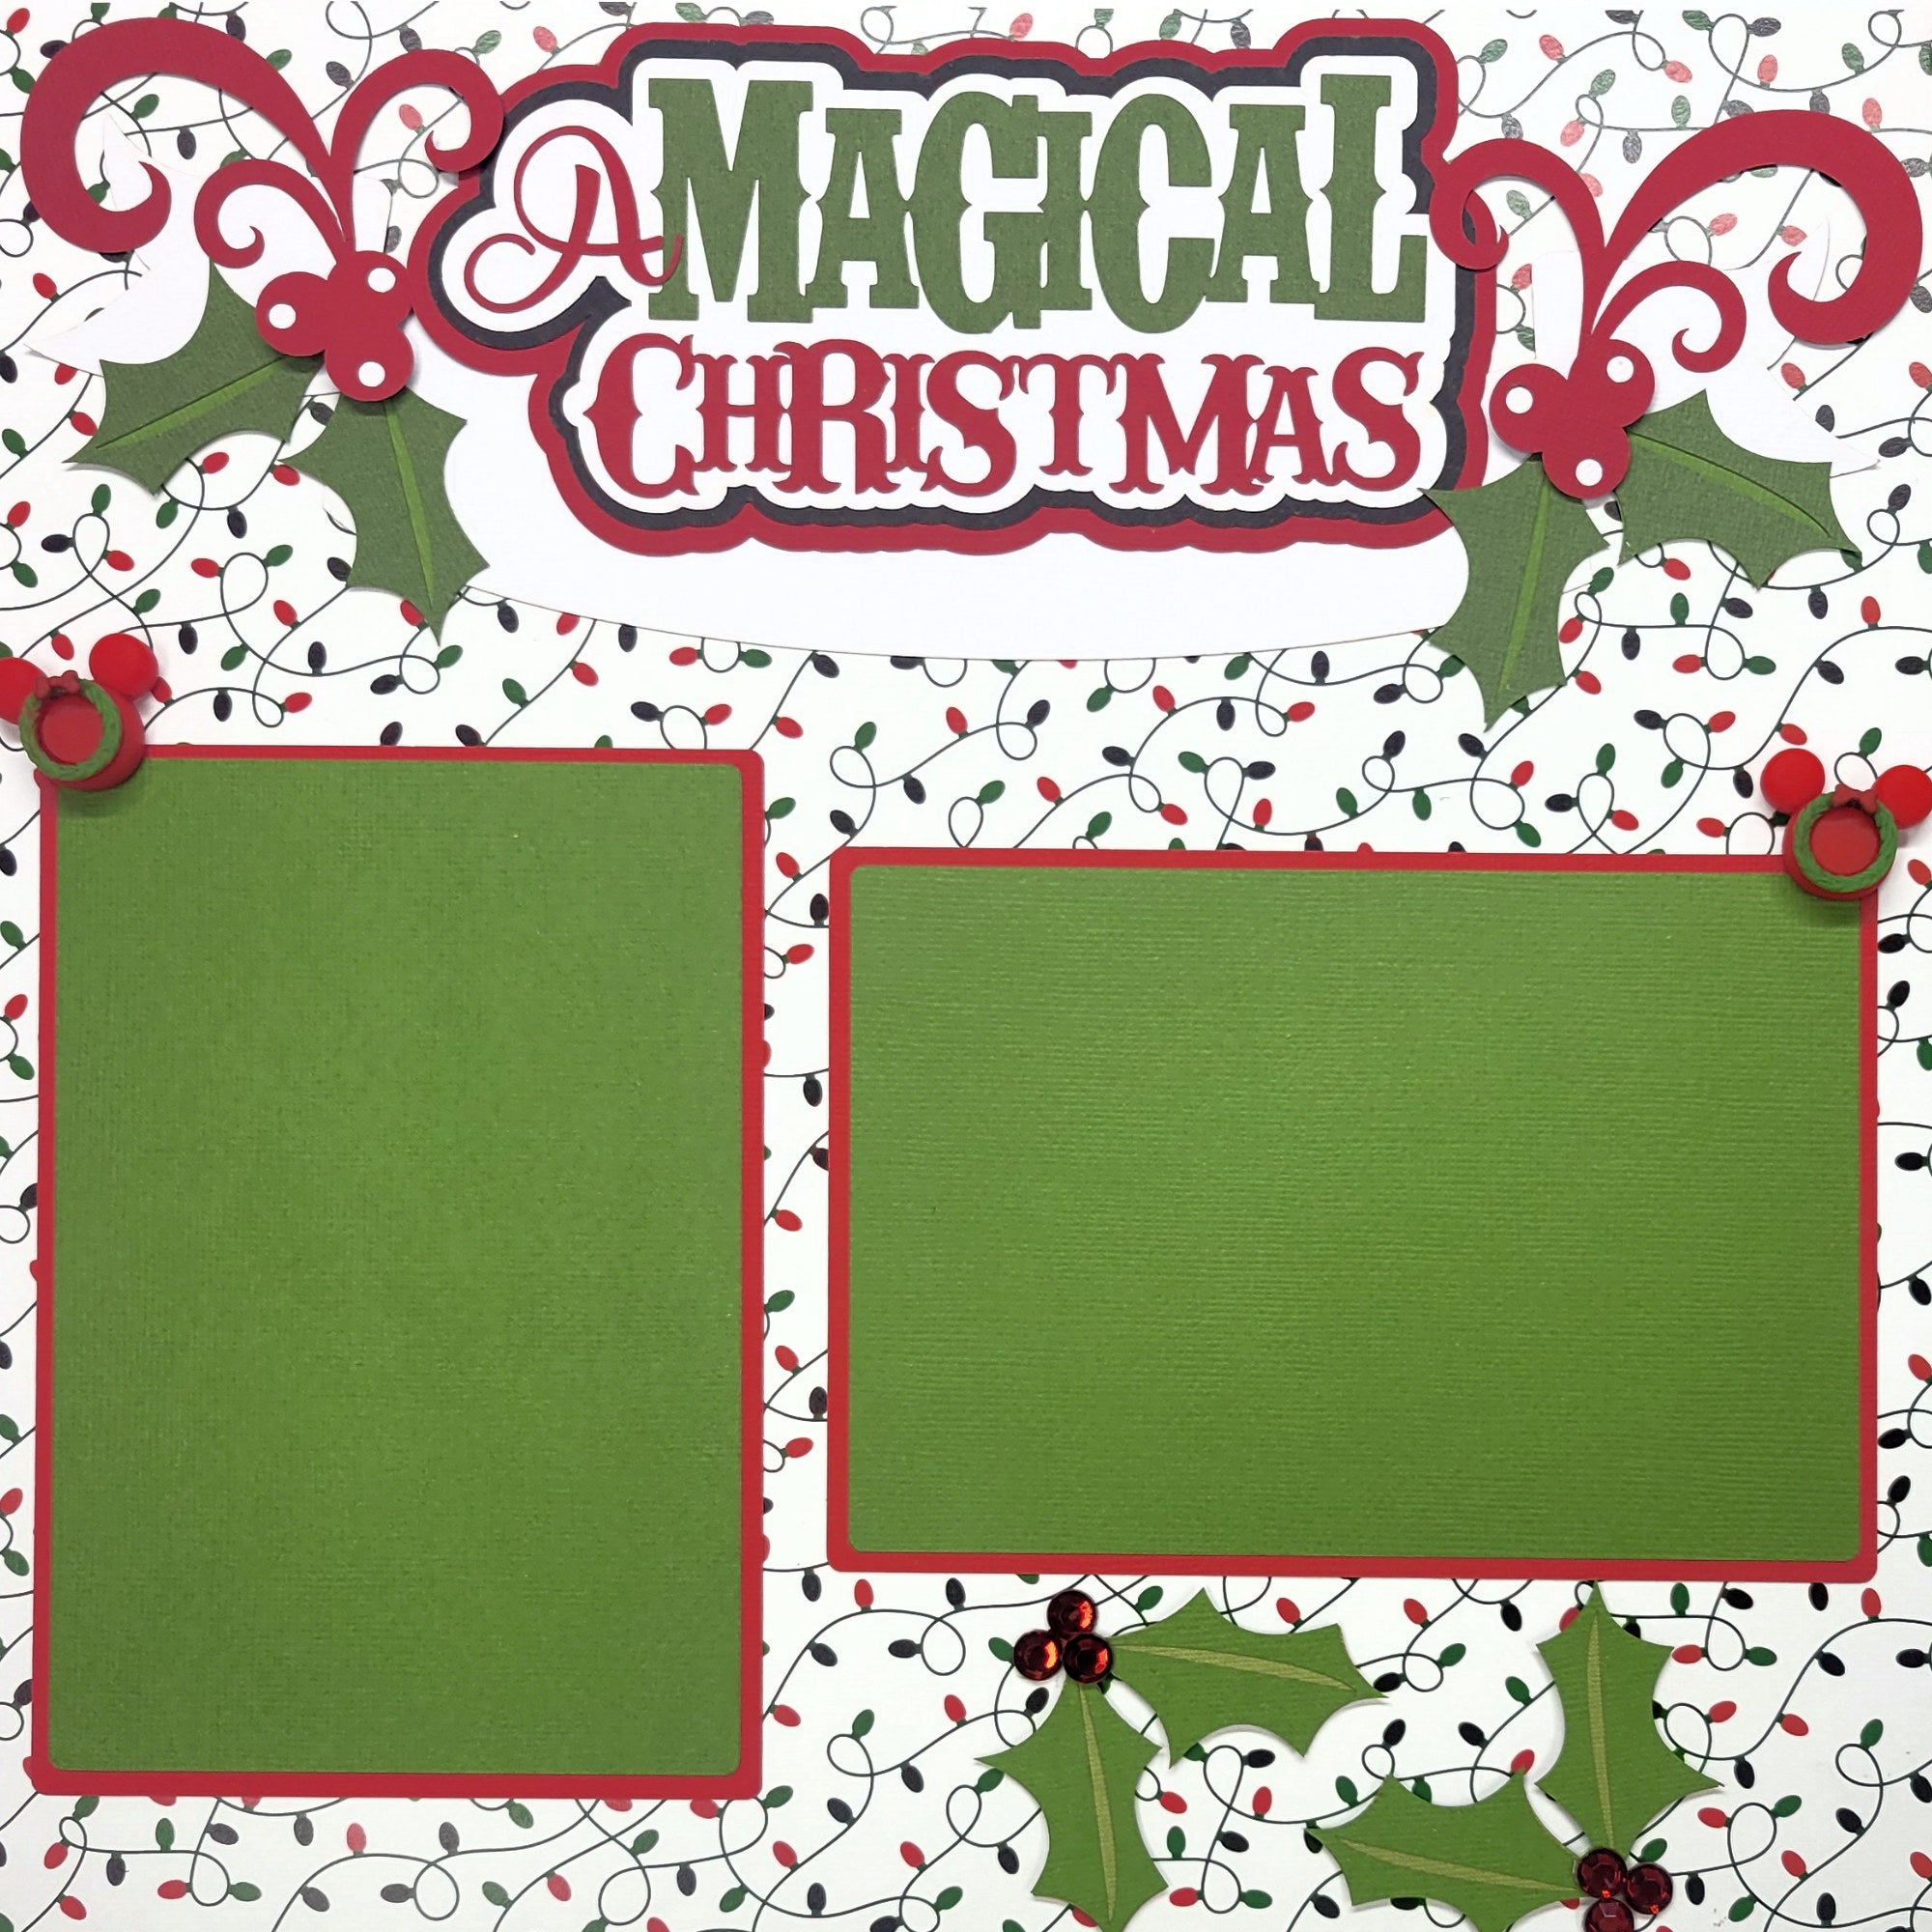 A Magical Christmas (2) - 12 x 12 Pages, Fully-Assembled & Hand-Crafted 3D Scrapbook Premade by SSC Designs